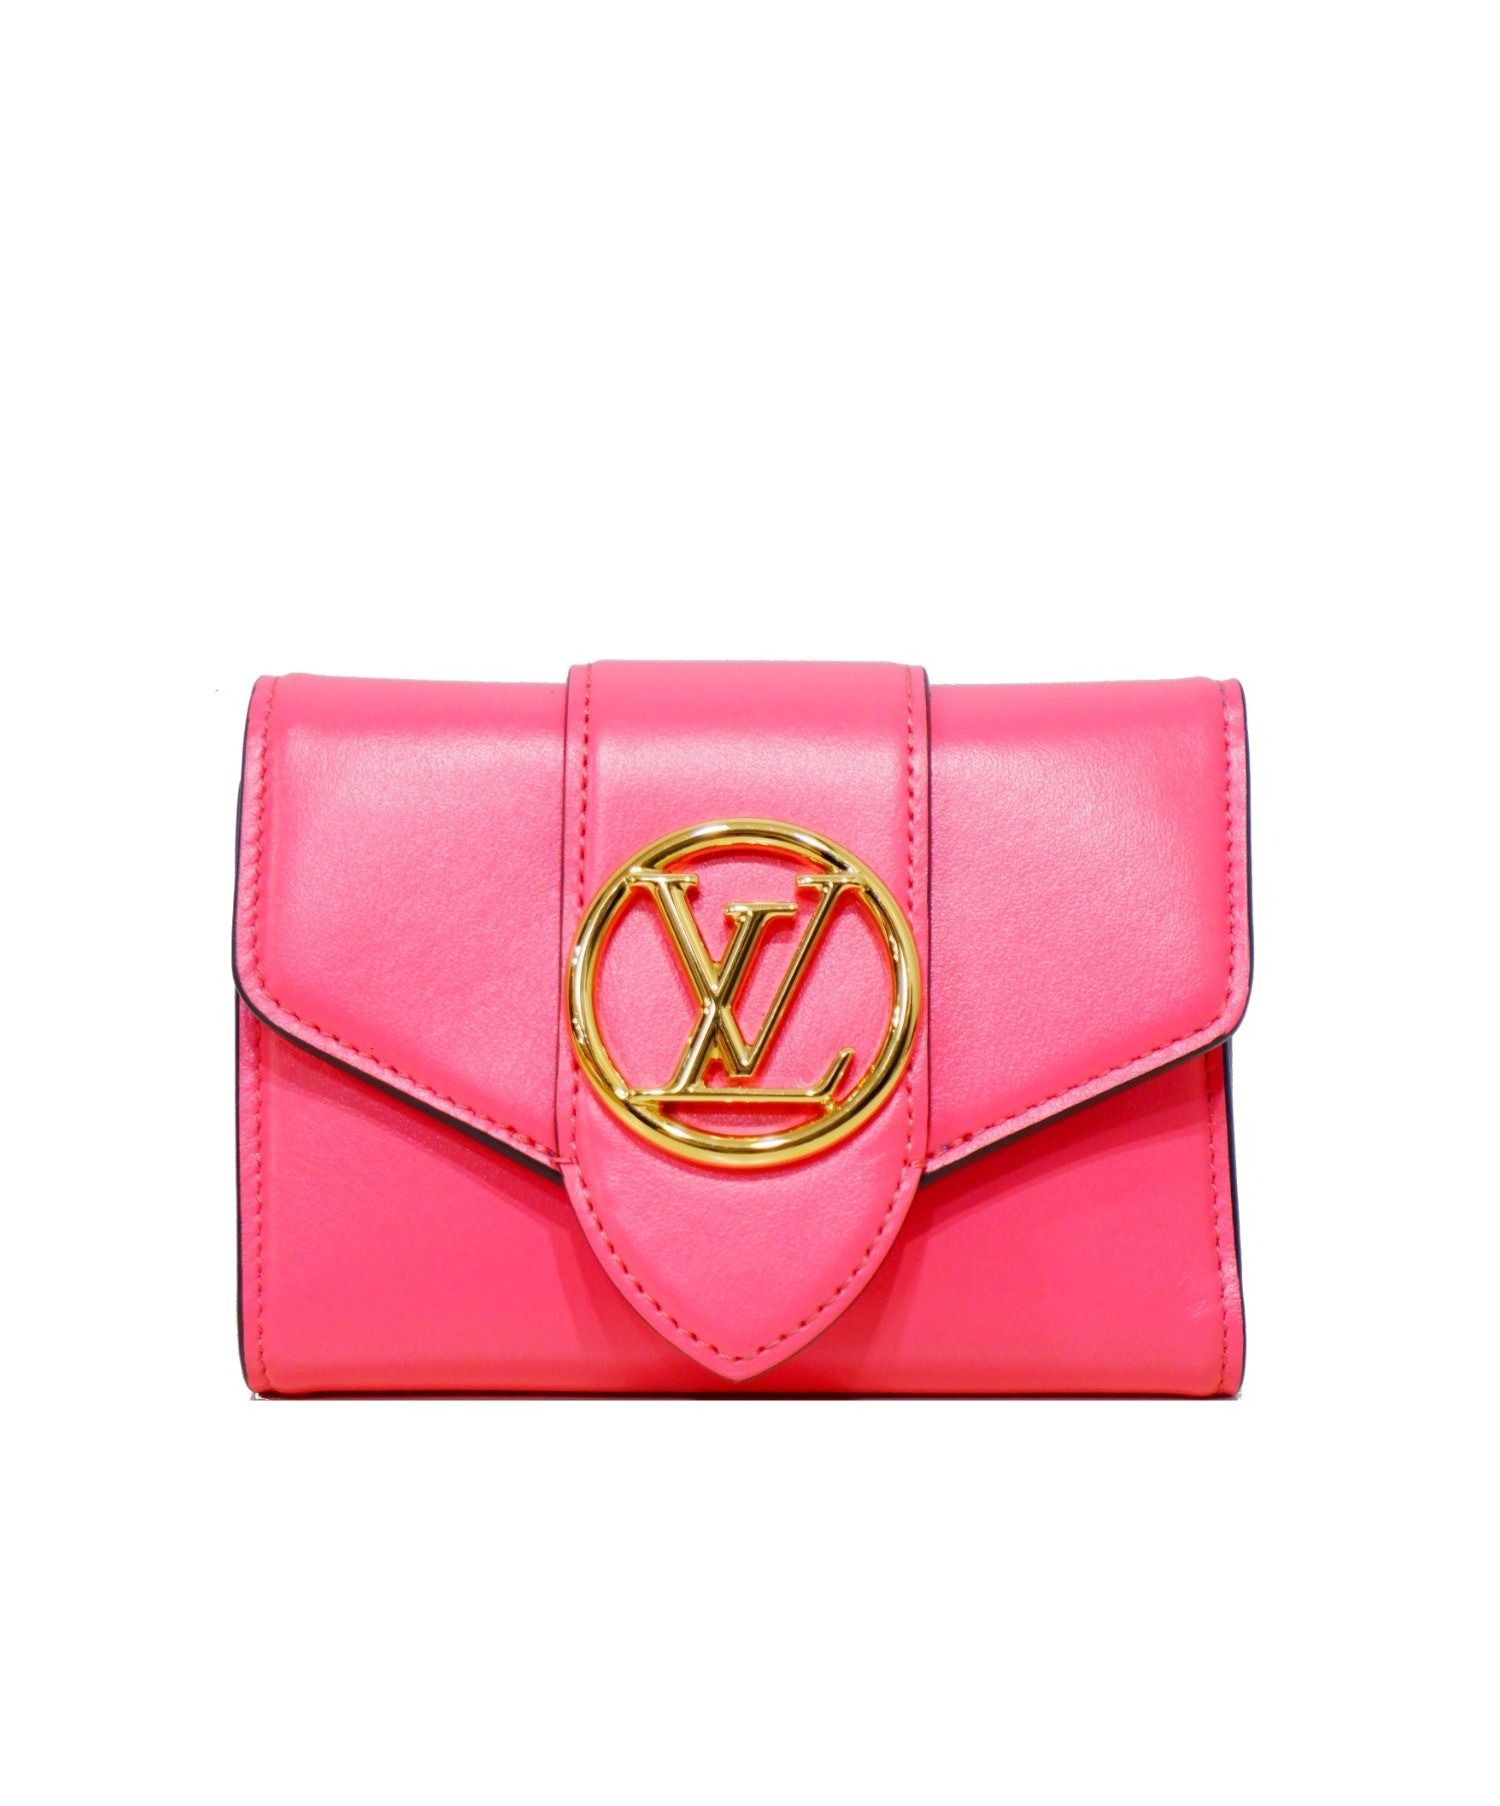 LOUIS VUITTON (ルイヴィトン) ポルトフォイユ LV ポンヌフ コンパクト ピンク M69177 FH0290 20年製